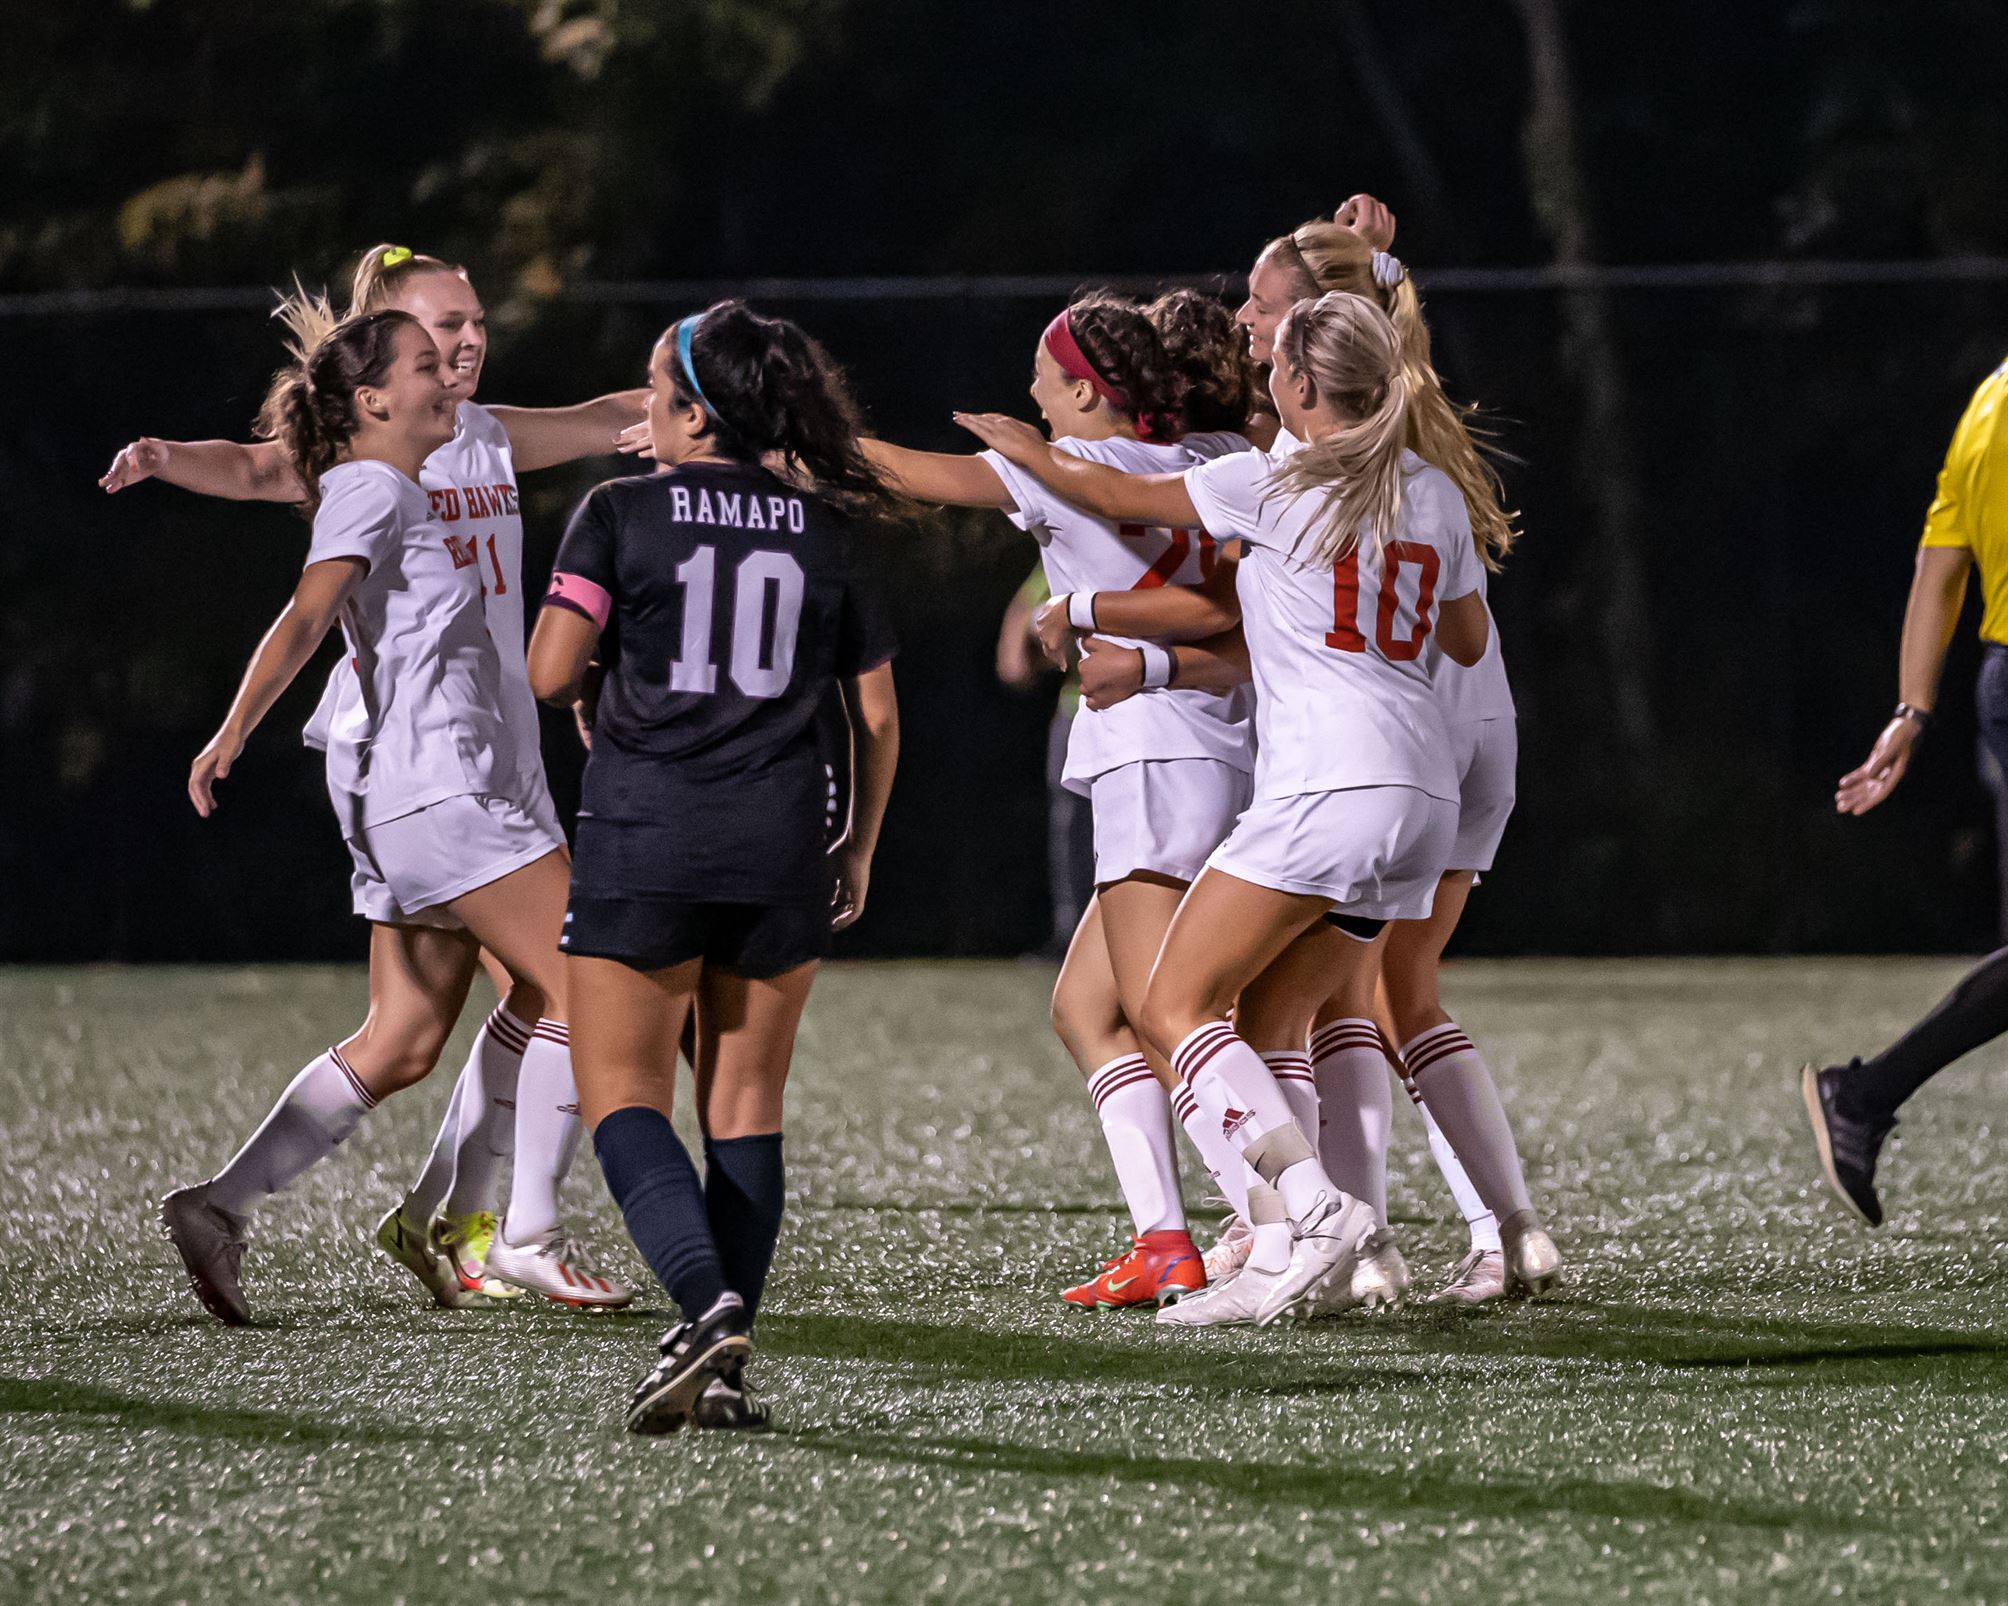 The women's soccer team celebrates after a goal scored during a Oct. 13 contest against Ramapo College. Photo courtesy of David Venezia